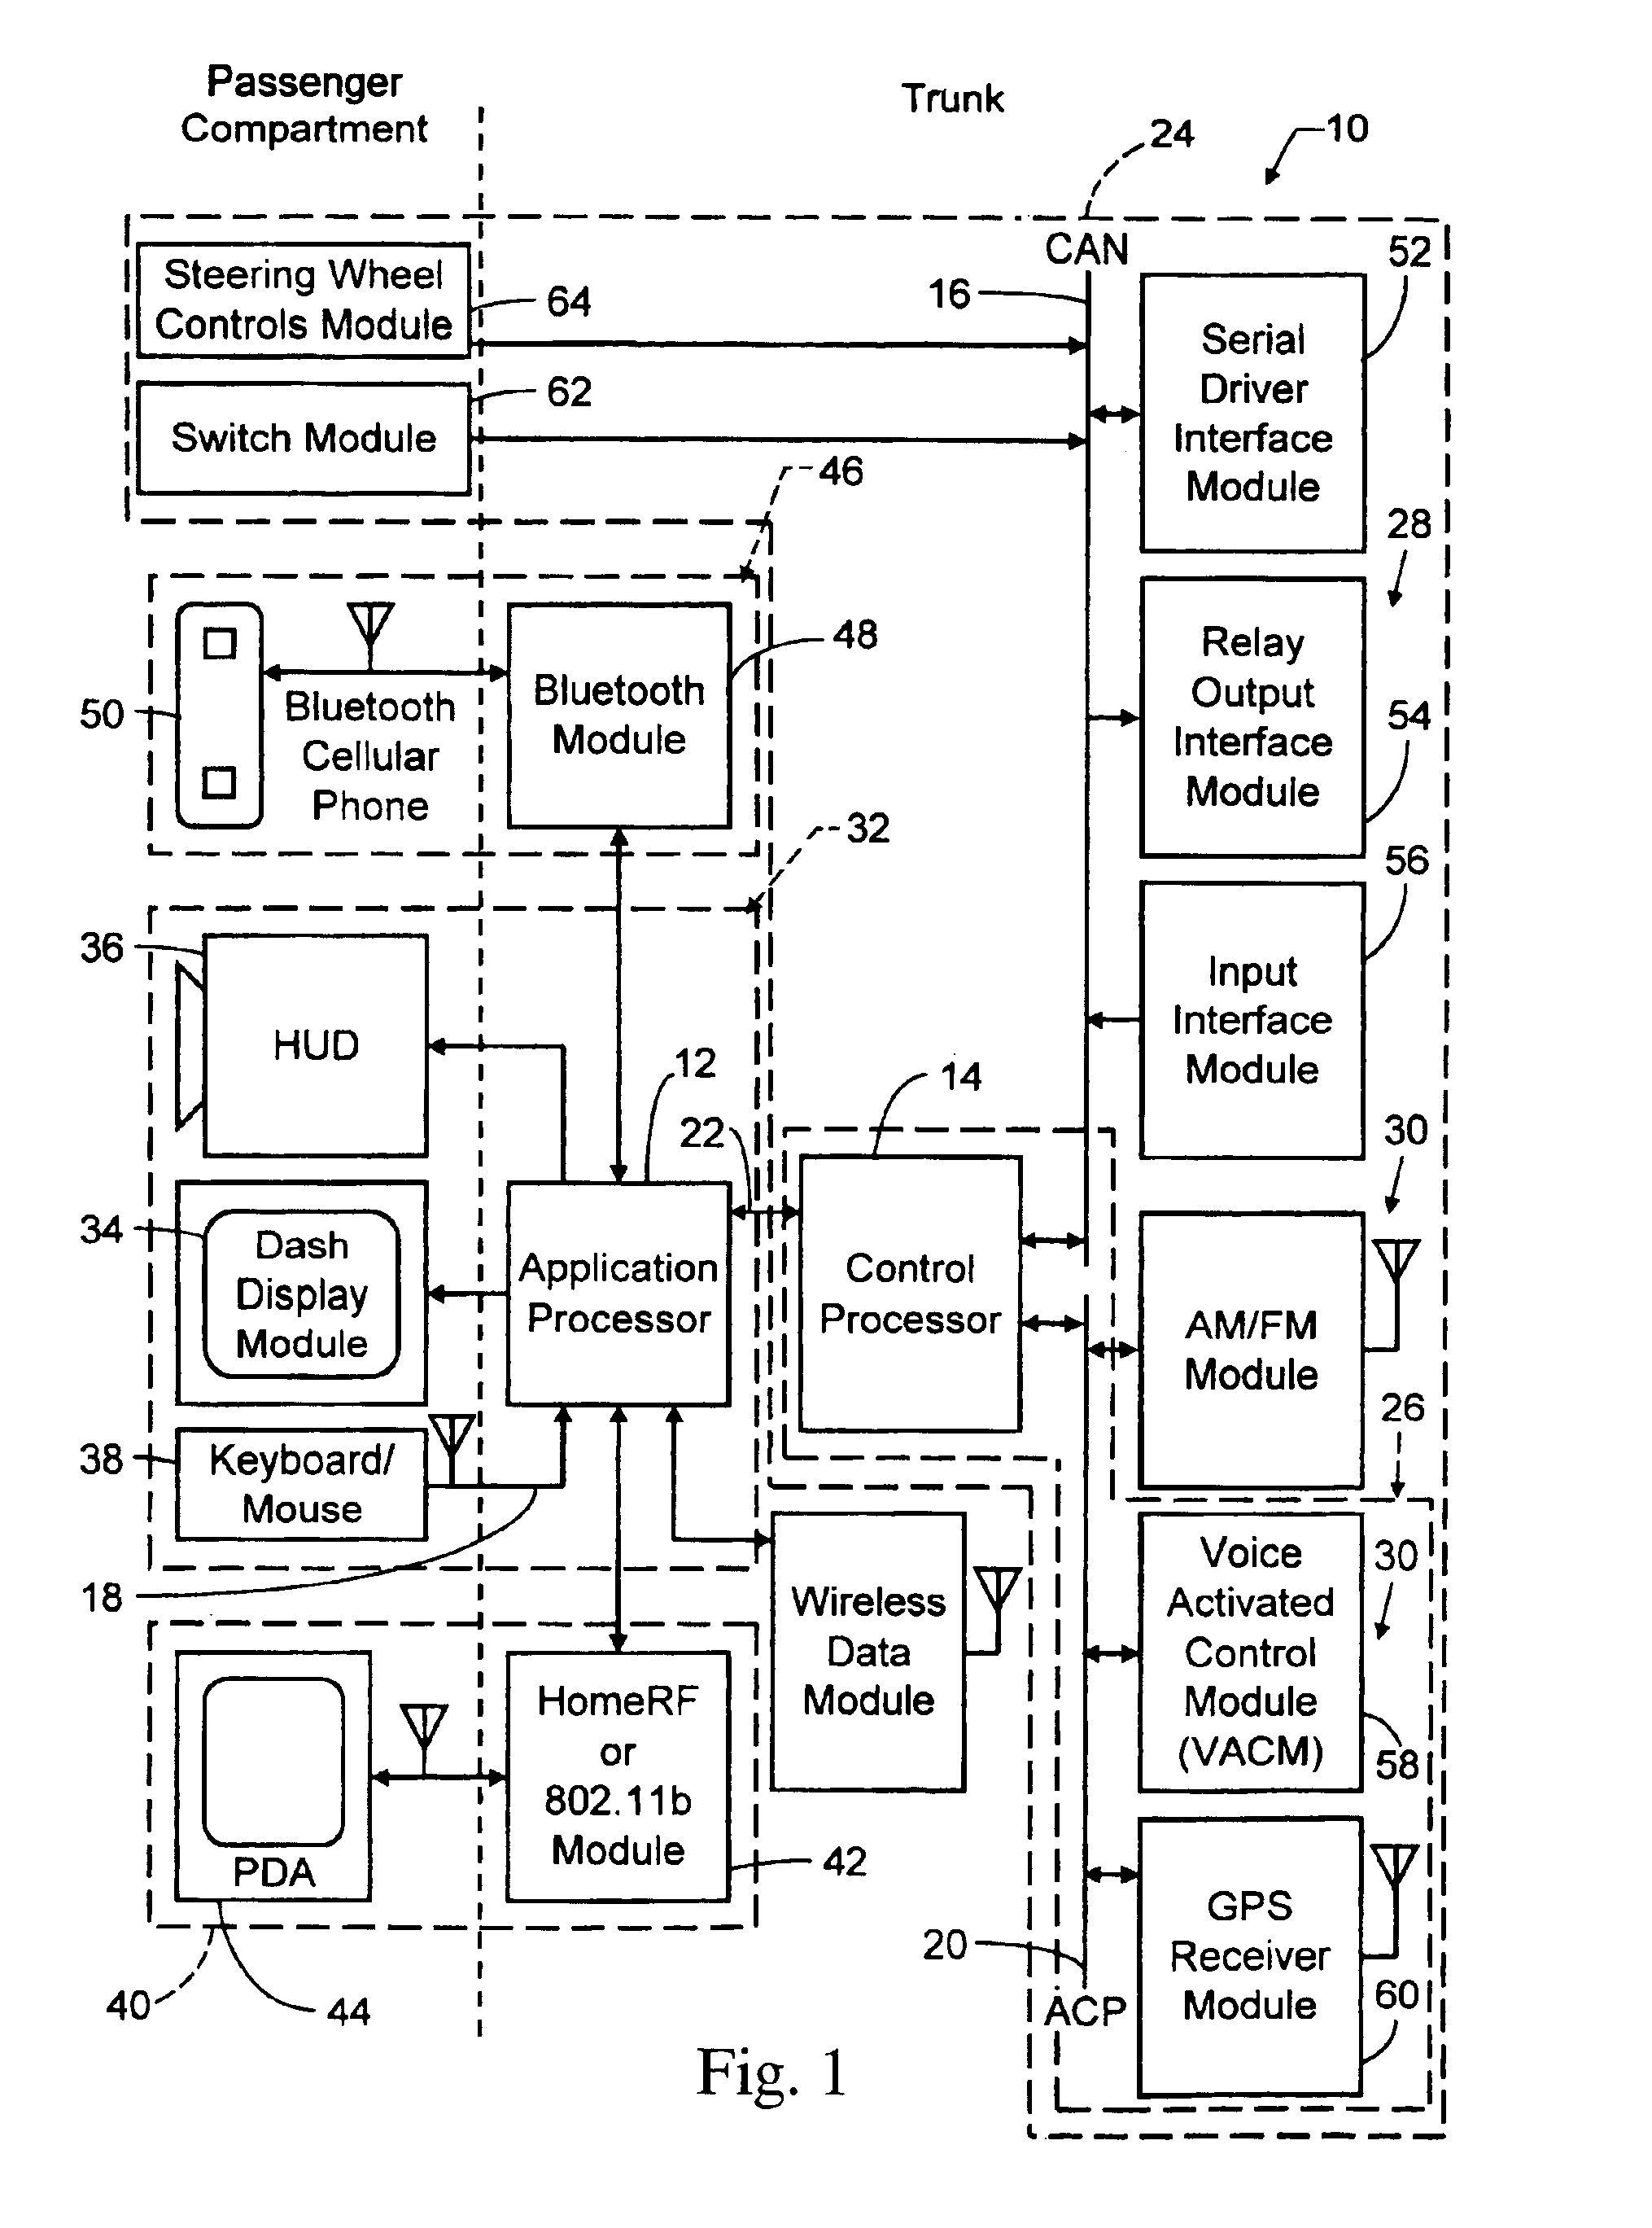 Communication network for an automobile